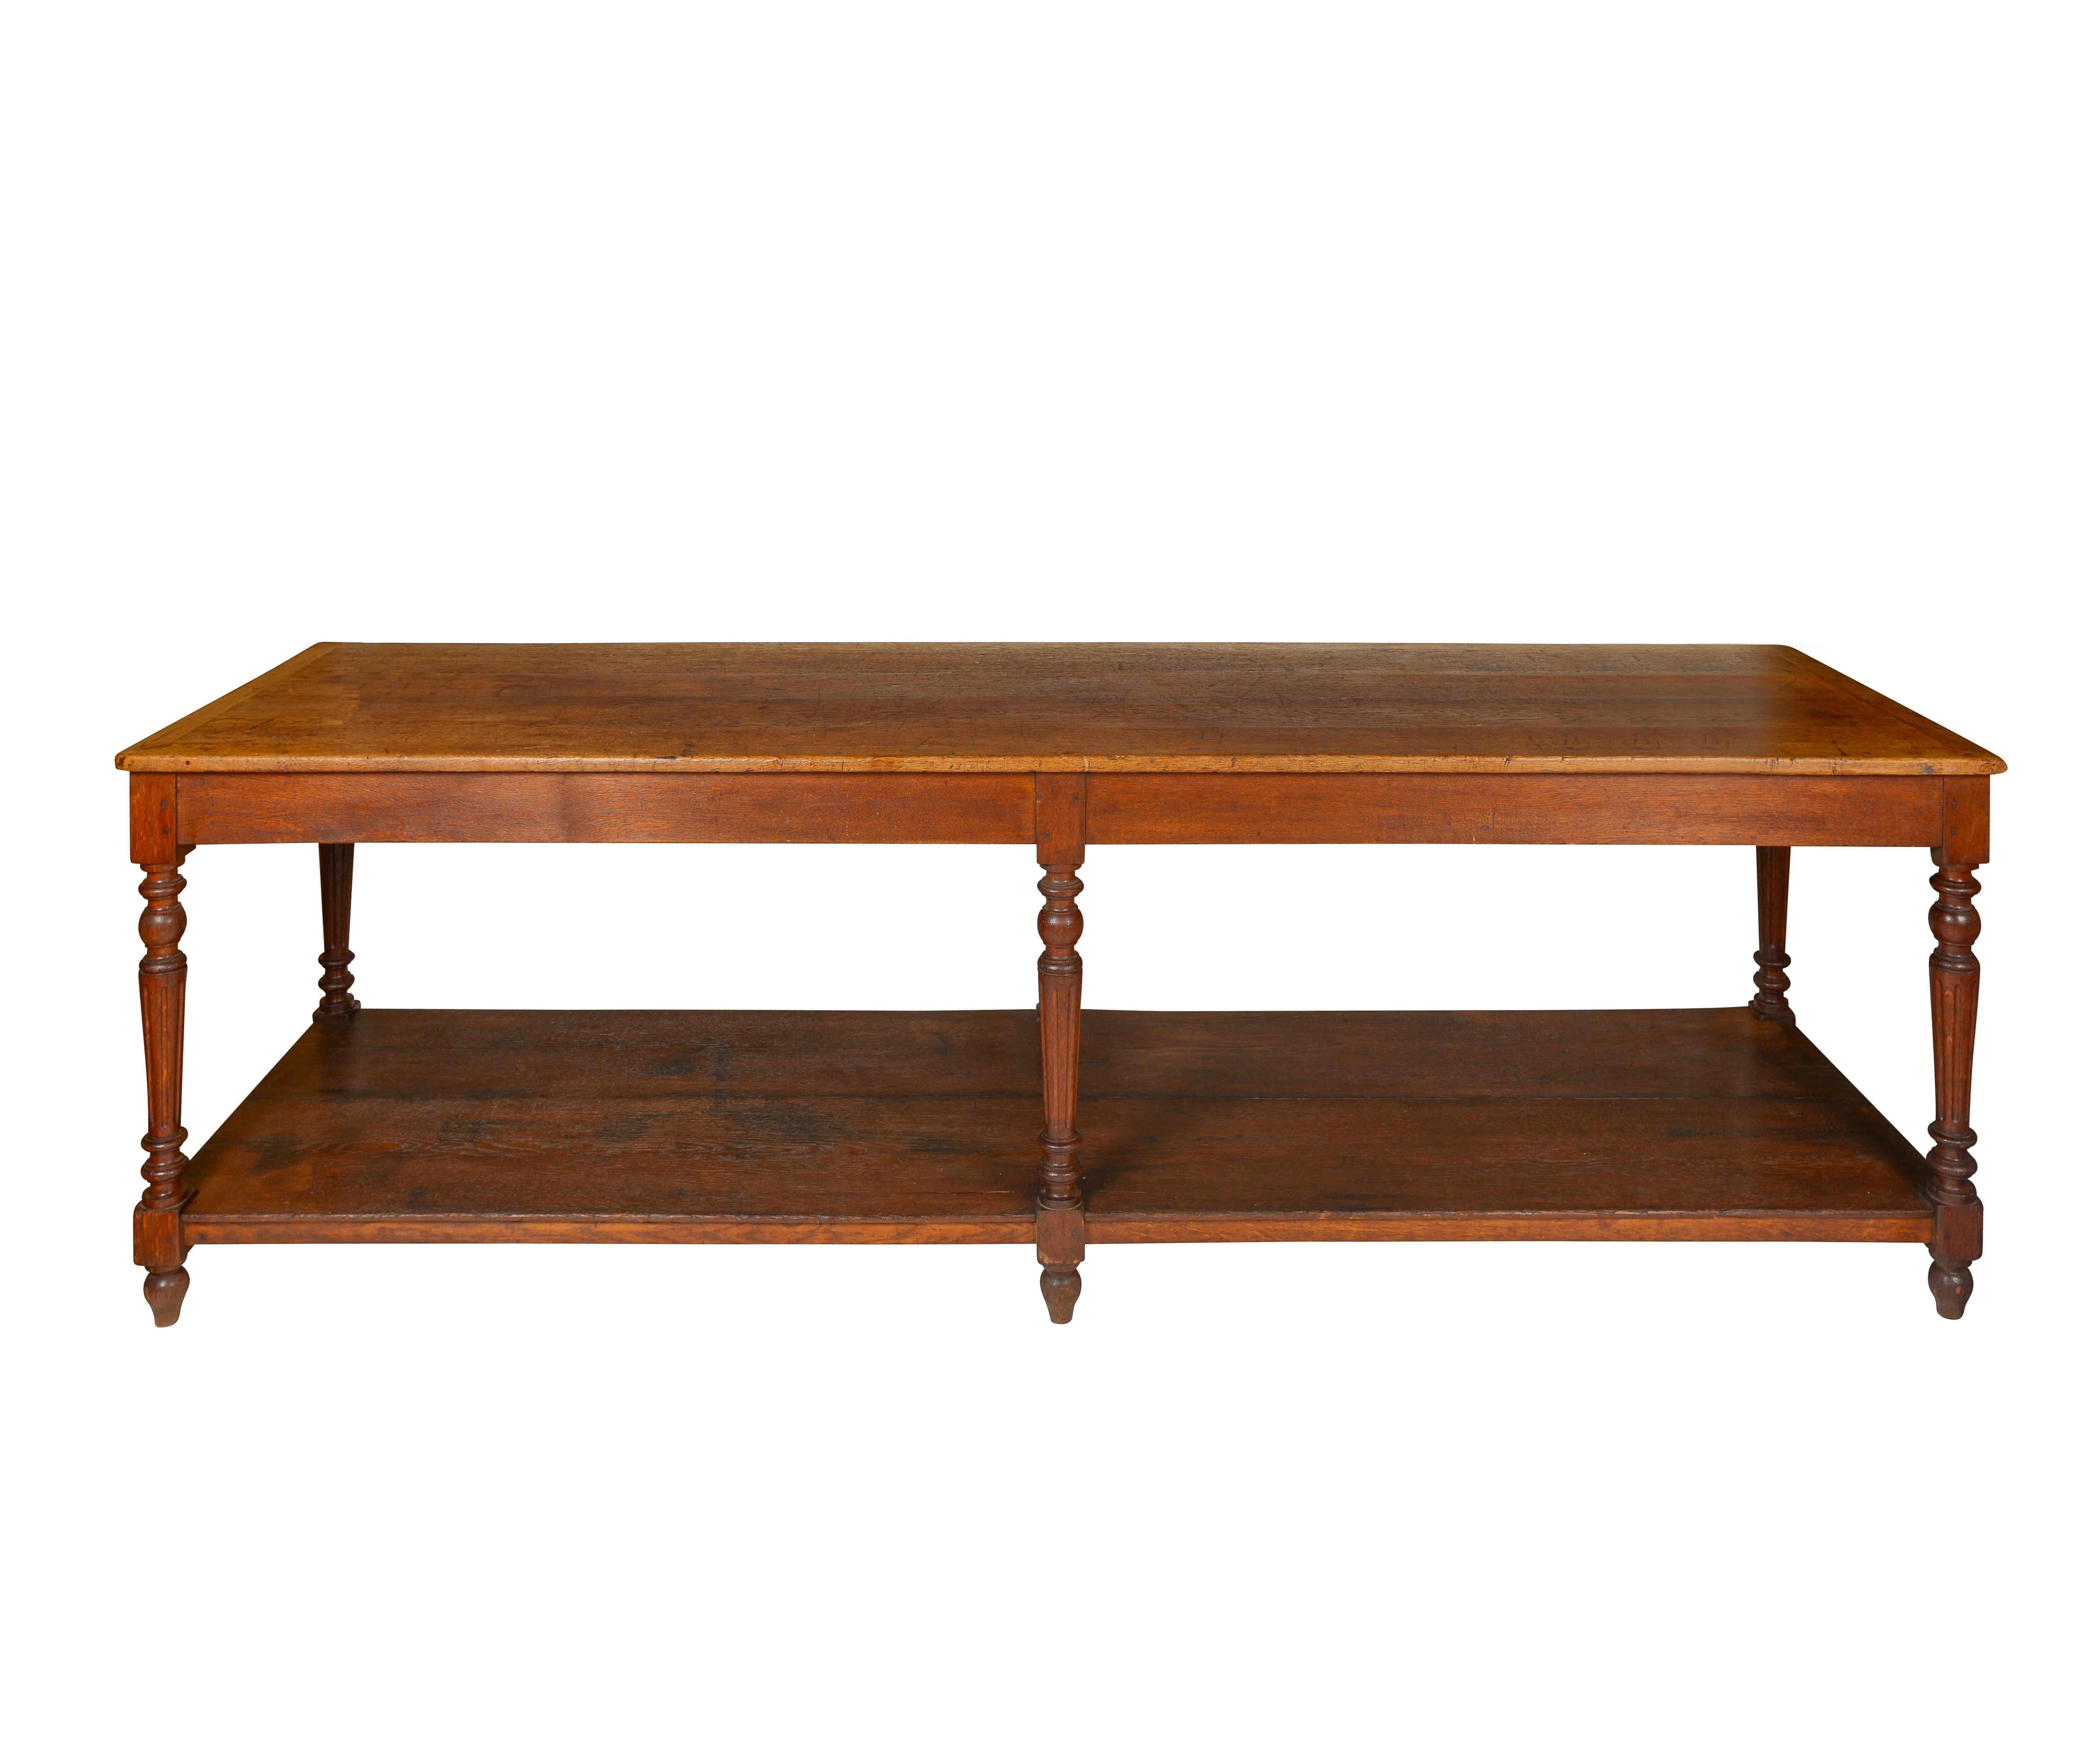 The top of rectangular form with overhanging edge, supported by six baluster-form, turned legs with lower shelf.